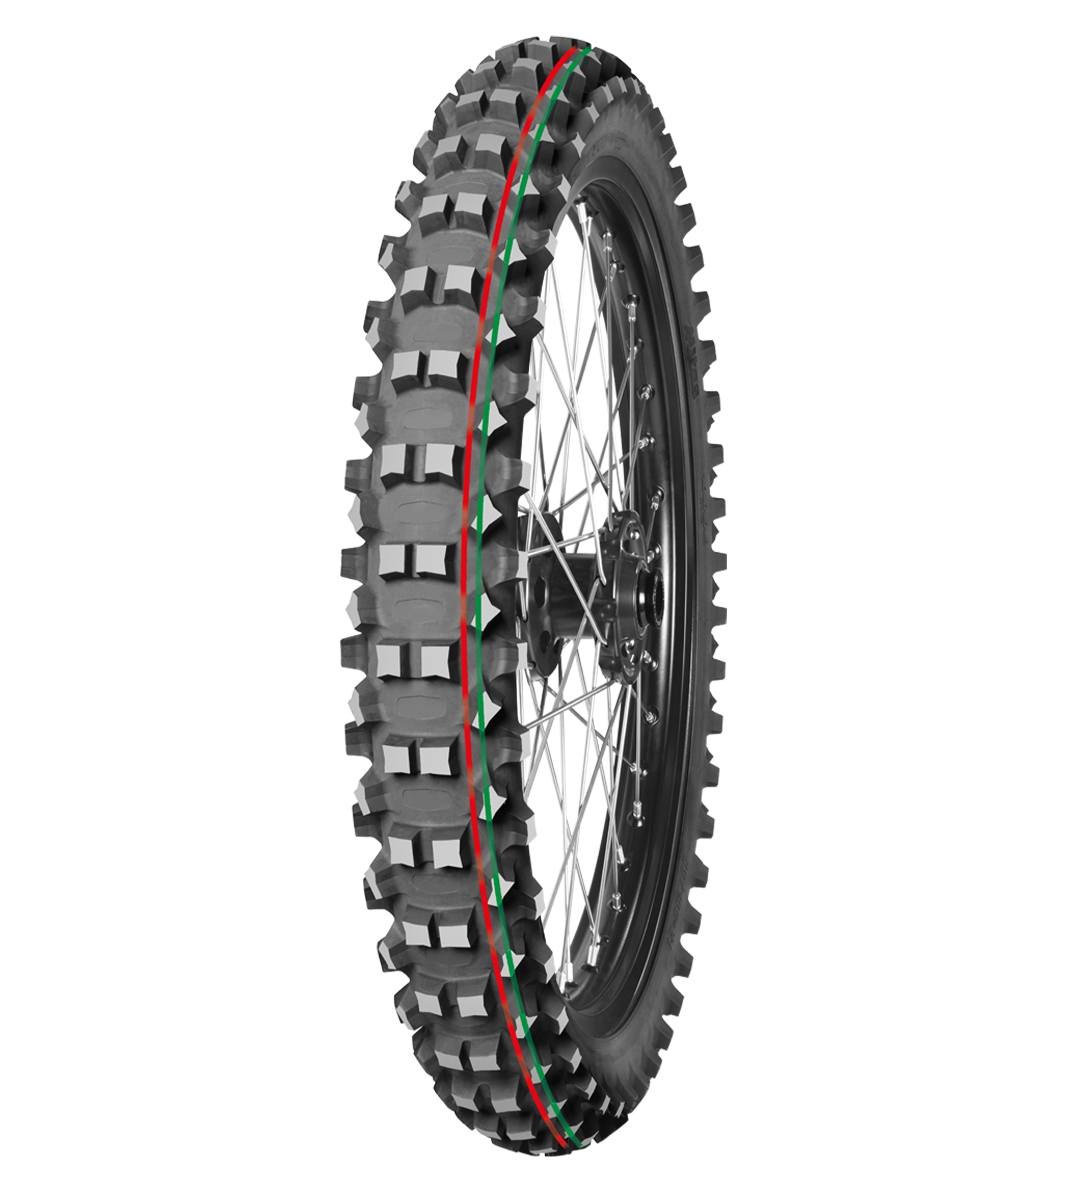 Mitas TERRA FORCE-MX MH 60/100-14 Motocross Competition Off-Road MEDIUM TO HARD 29M Red & Green Tube Front Tire, 226044, 60/100-14, Front, Motocross, Motocross Competition, Off-Road, Terra Force, Terra Force-MX MH, Trail, Tires - Imported and distributed in North & South America by Lindeco Genuine Powersports - Premier Powersports Equipment and Accessories for Motorcycle Enthusiasts, Professional Riders and Dealers.